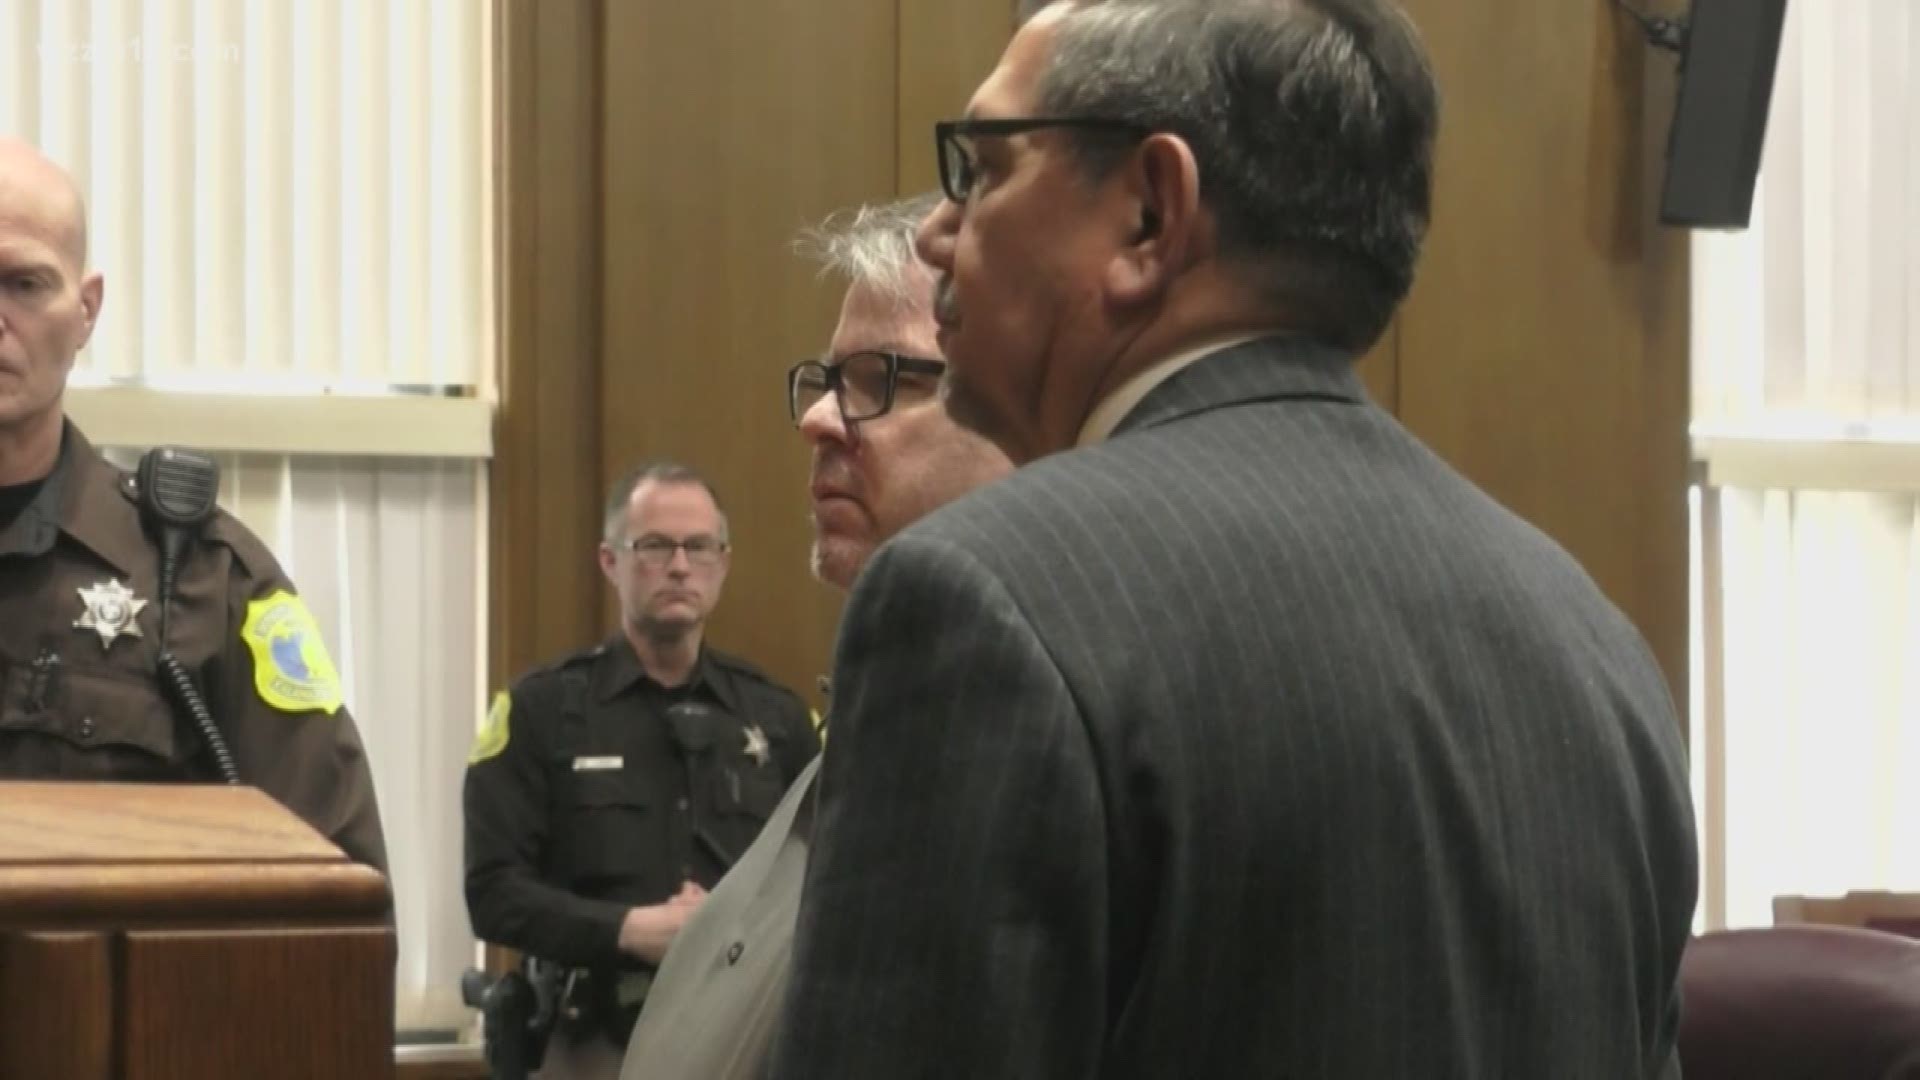 The day before Jason Dalton's jury trial was set to begin, he pleaded guilty on all counts.